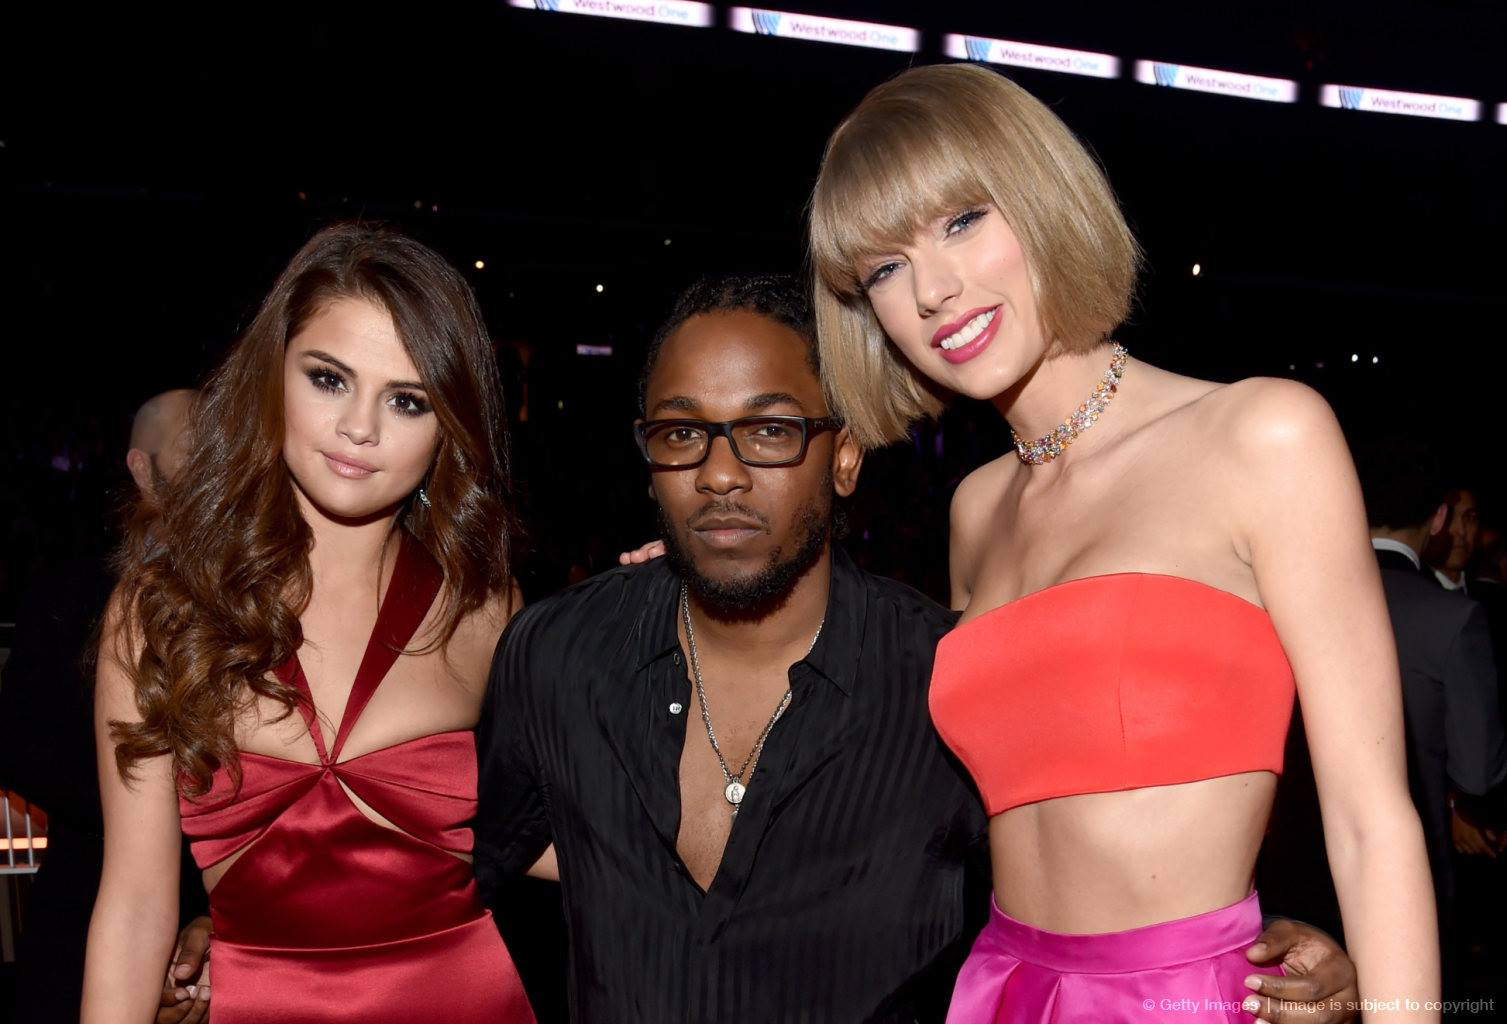 facebook.comSelena Gomez, Kendrick Lamar and Taylor Swift pose together at the 2016 Grammy Awards.